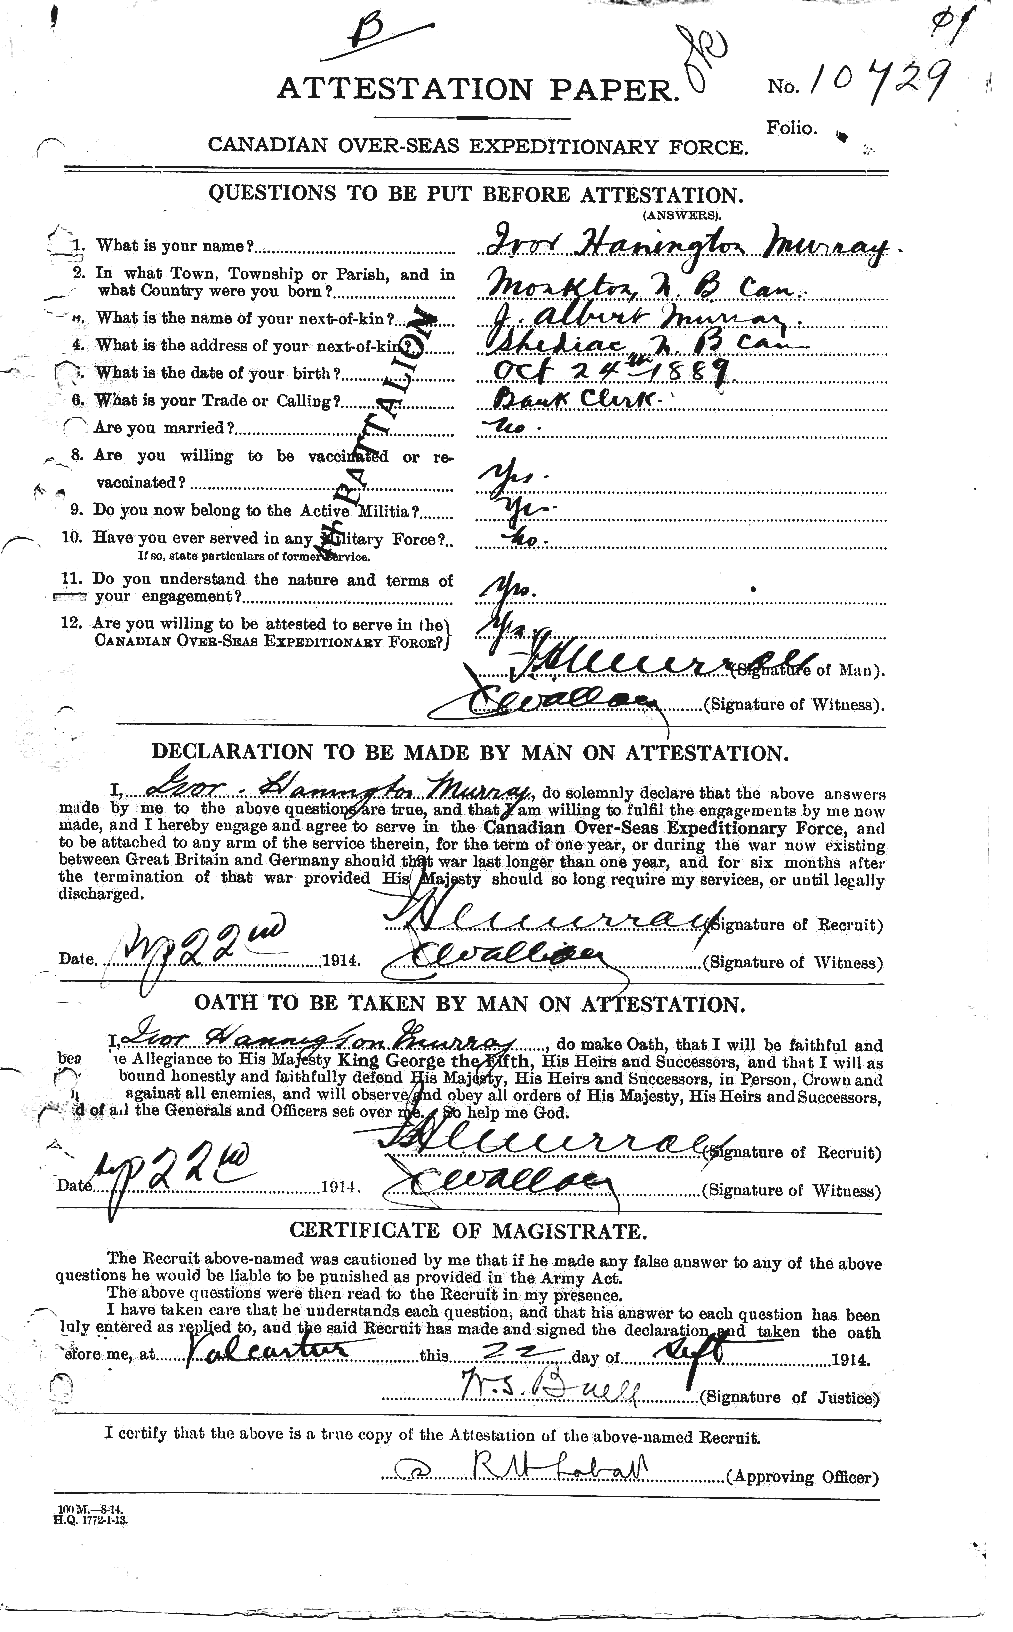 Personnel Records of the First World War - CEF 518002a